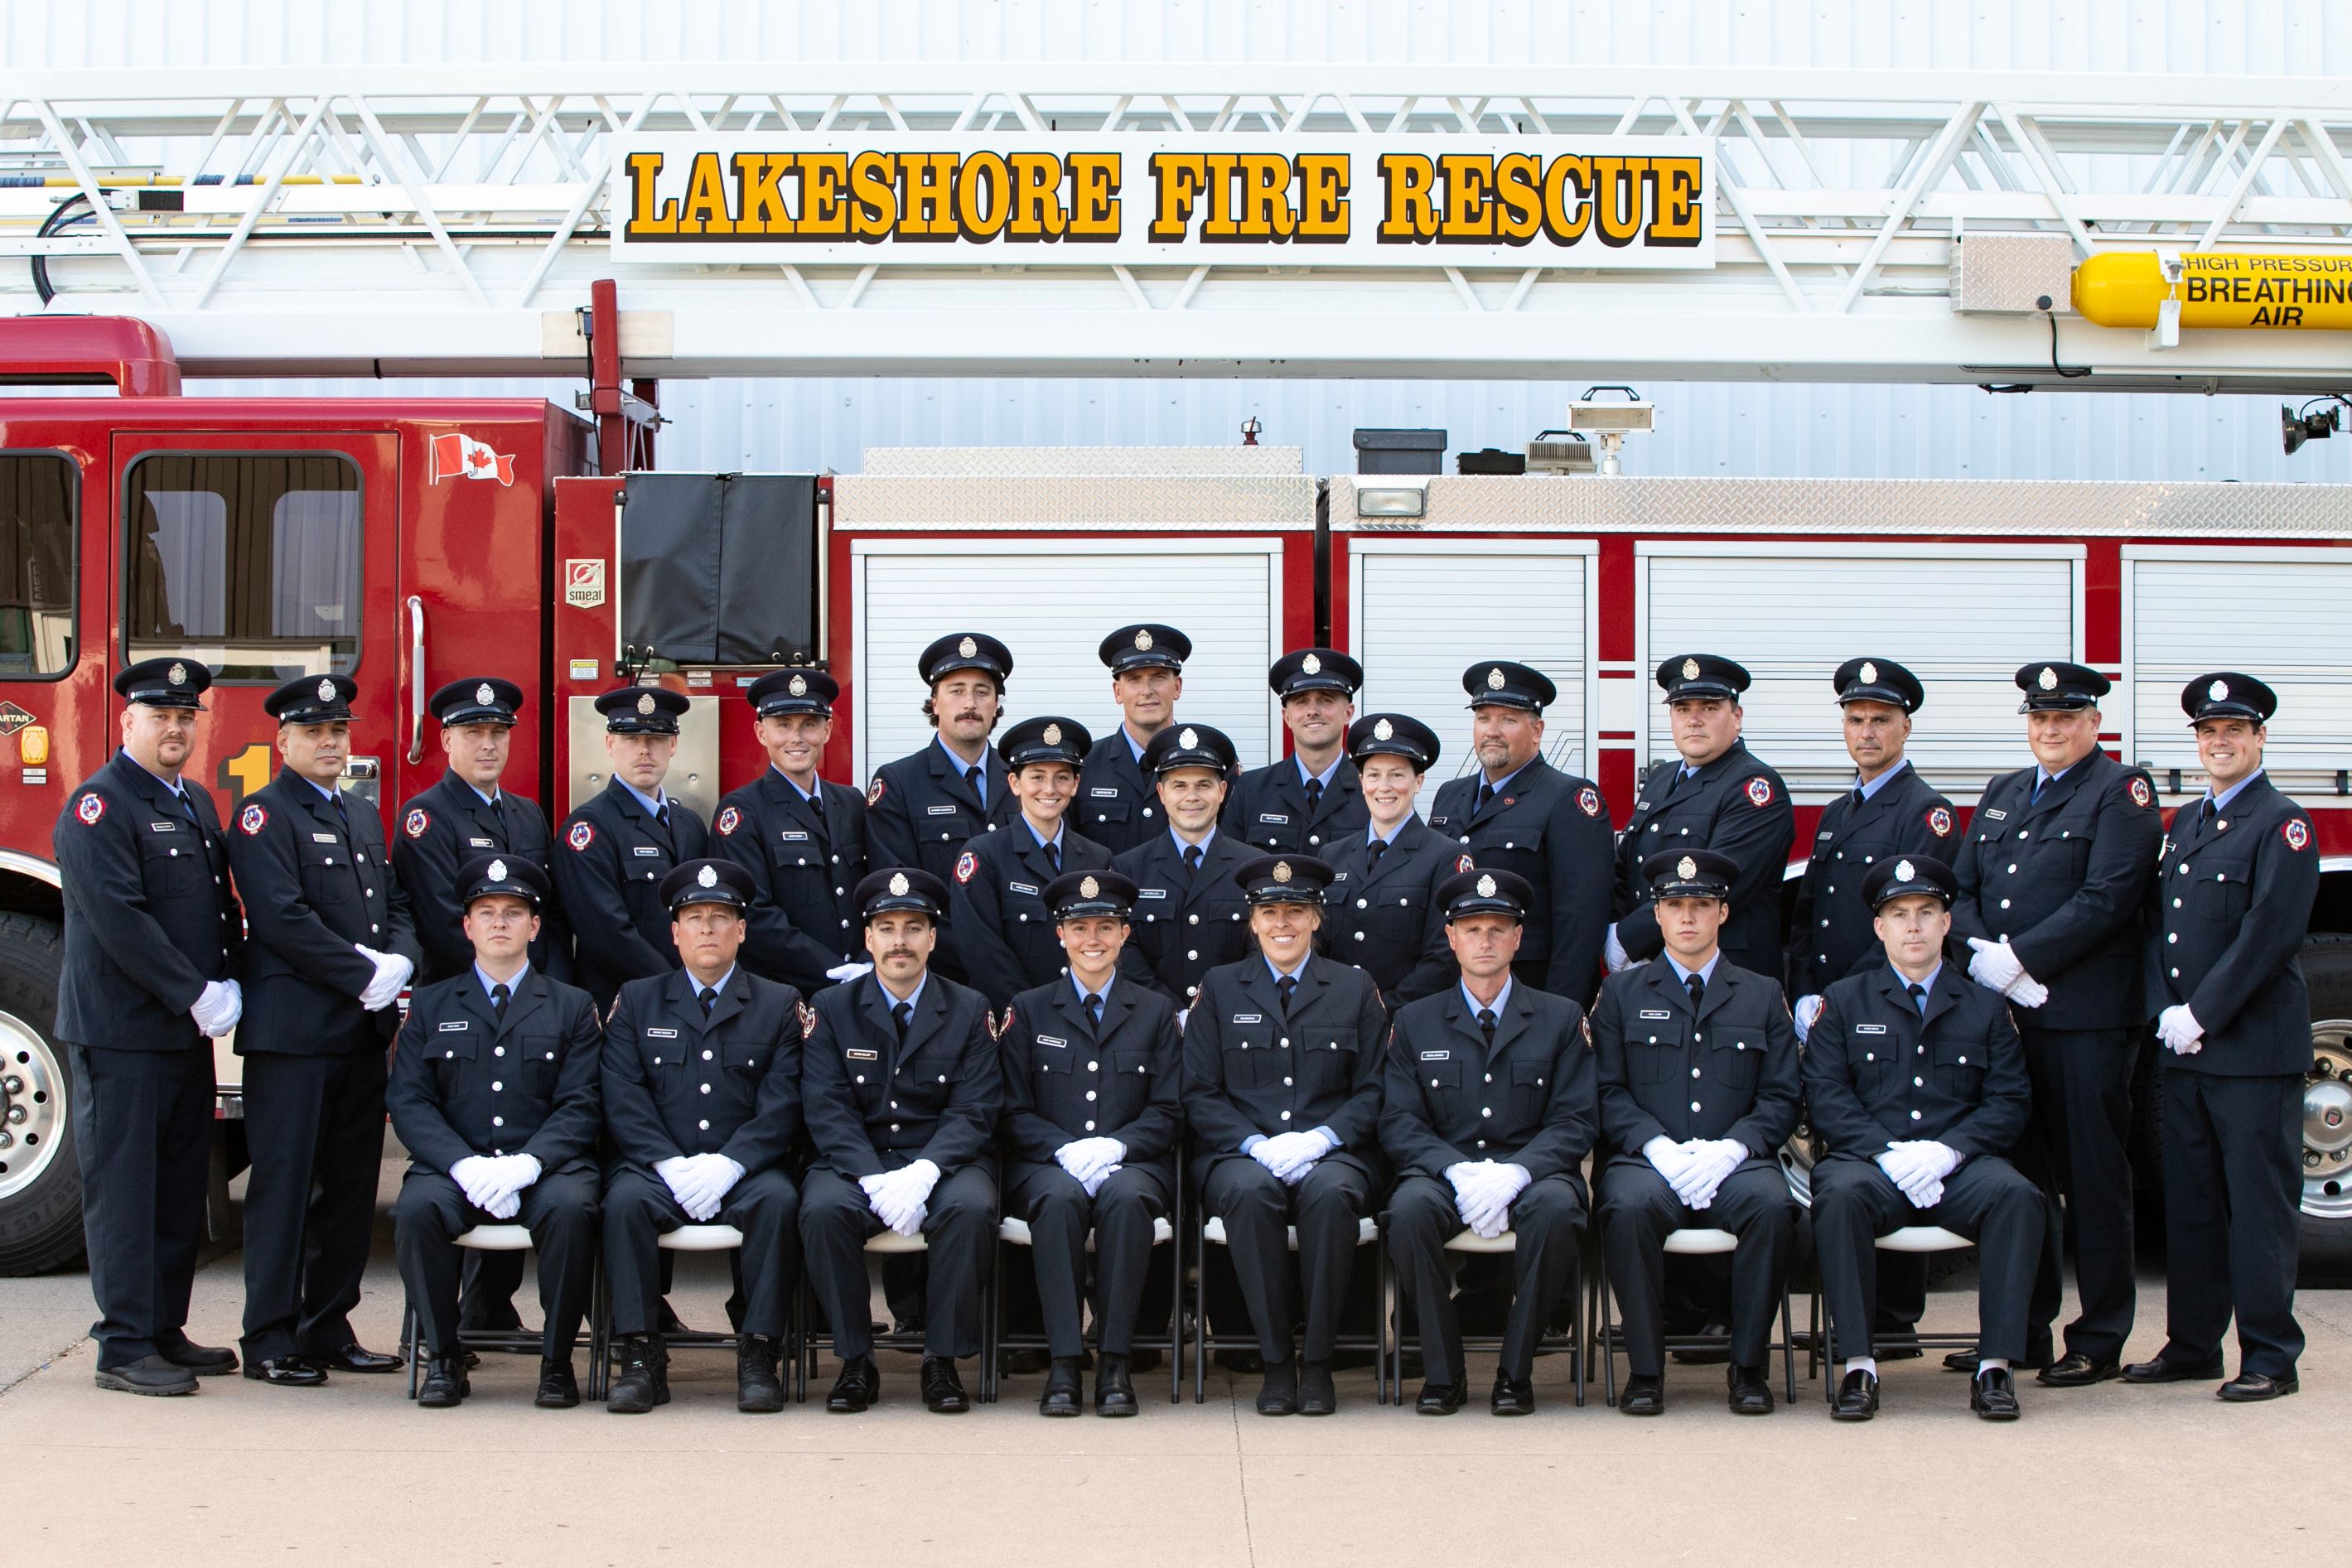 Group photo of the 2019 and 2022 fire recruit graduates. Firefighters in dress uniforms standing in front of a firetruck.